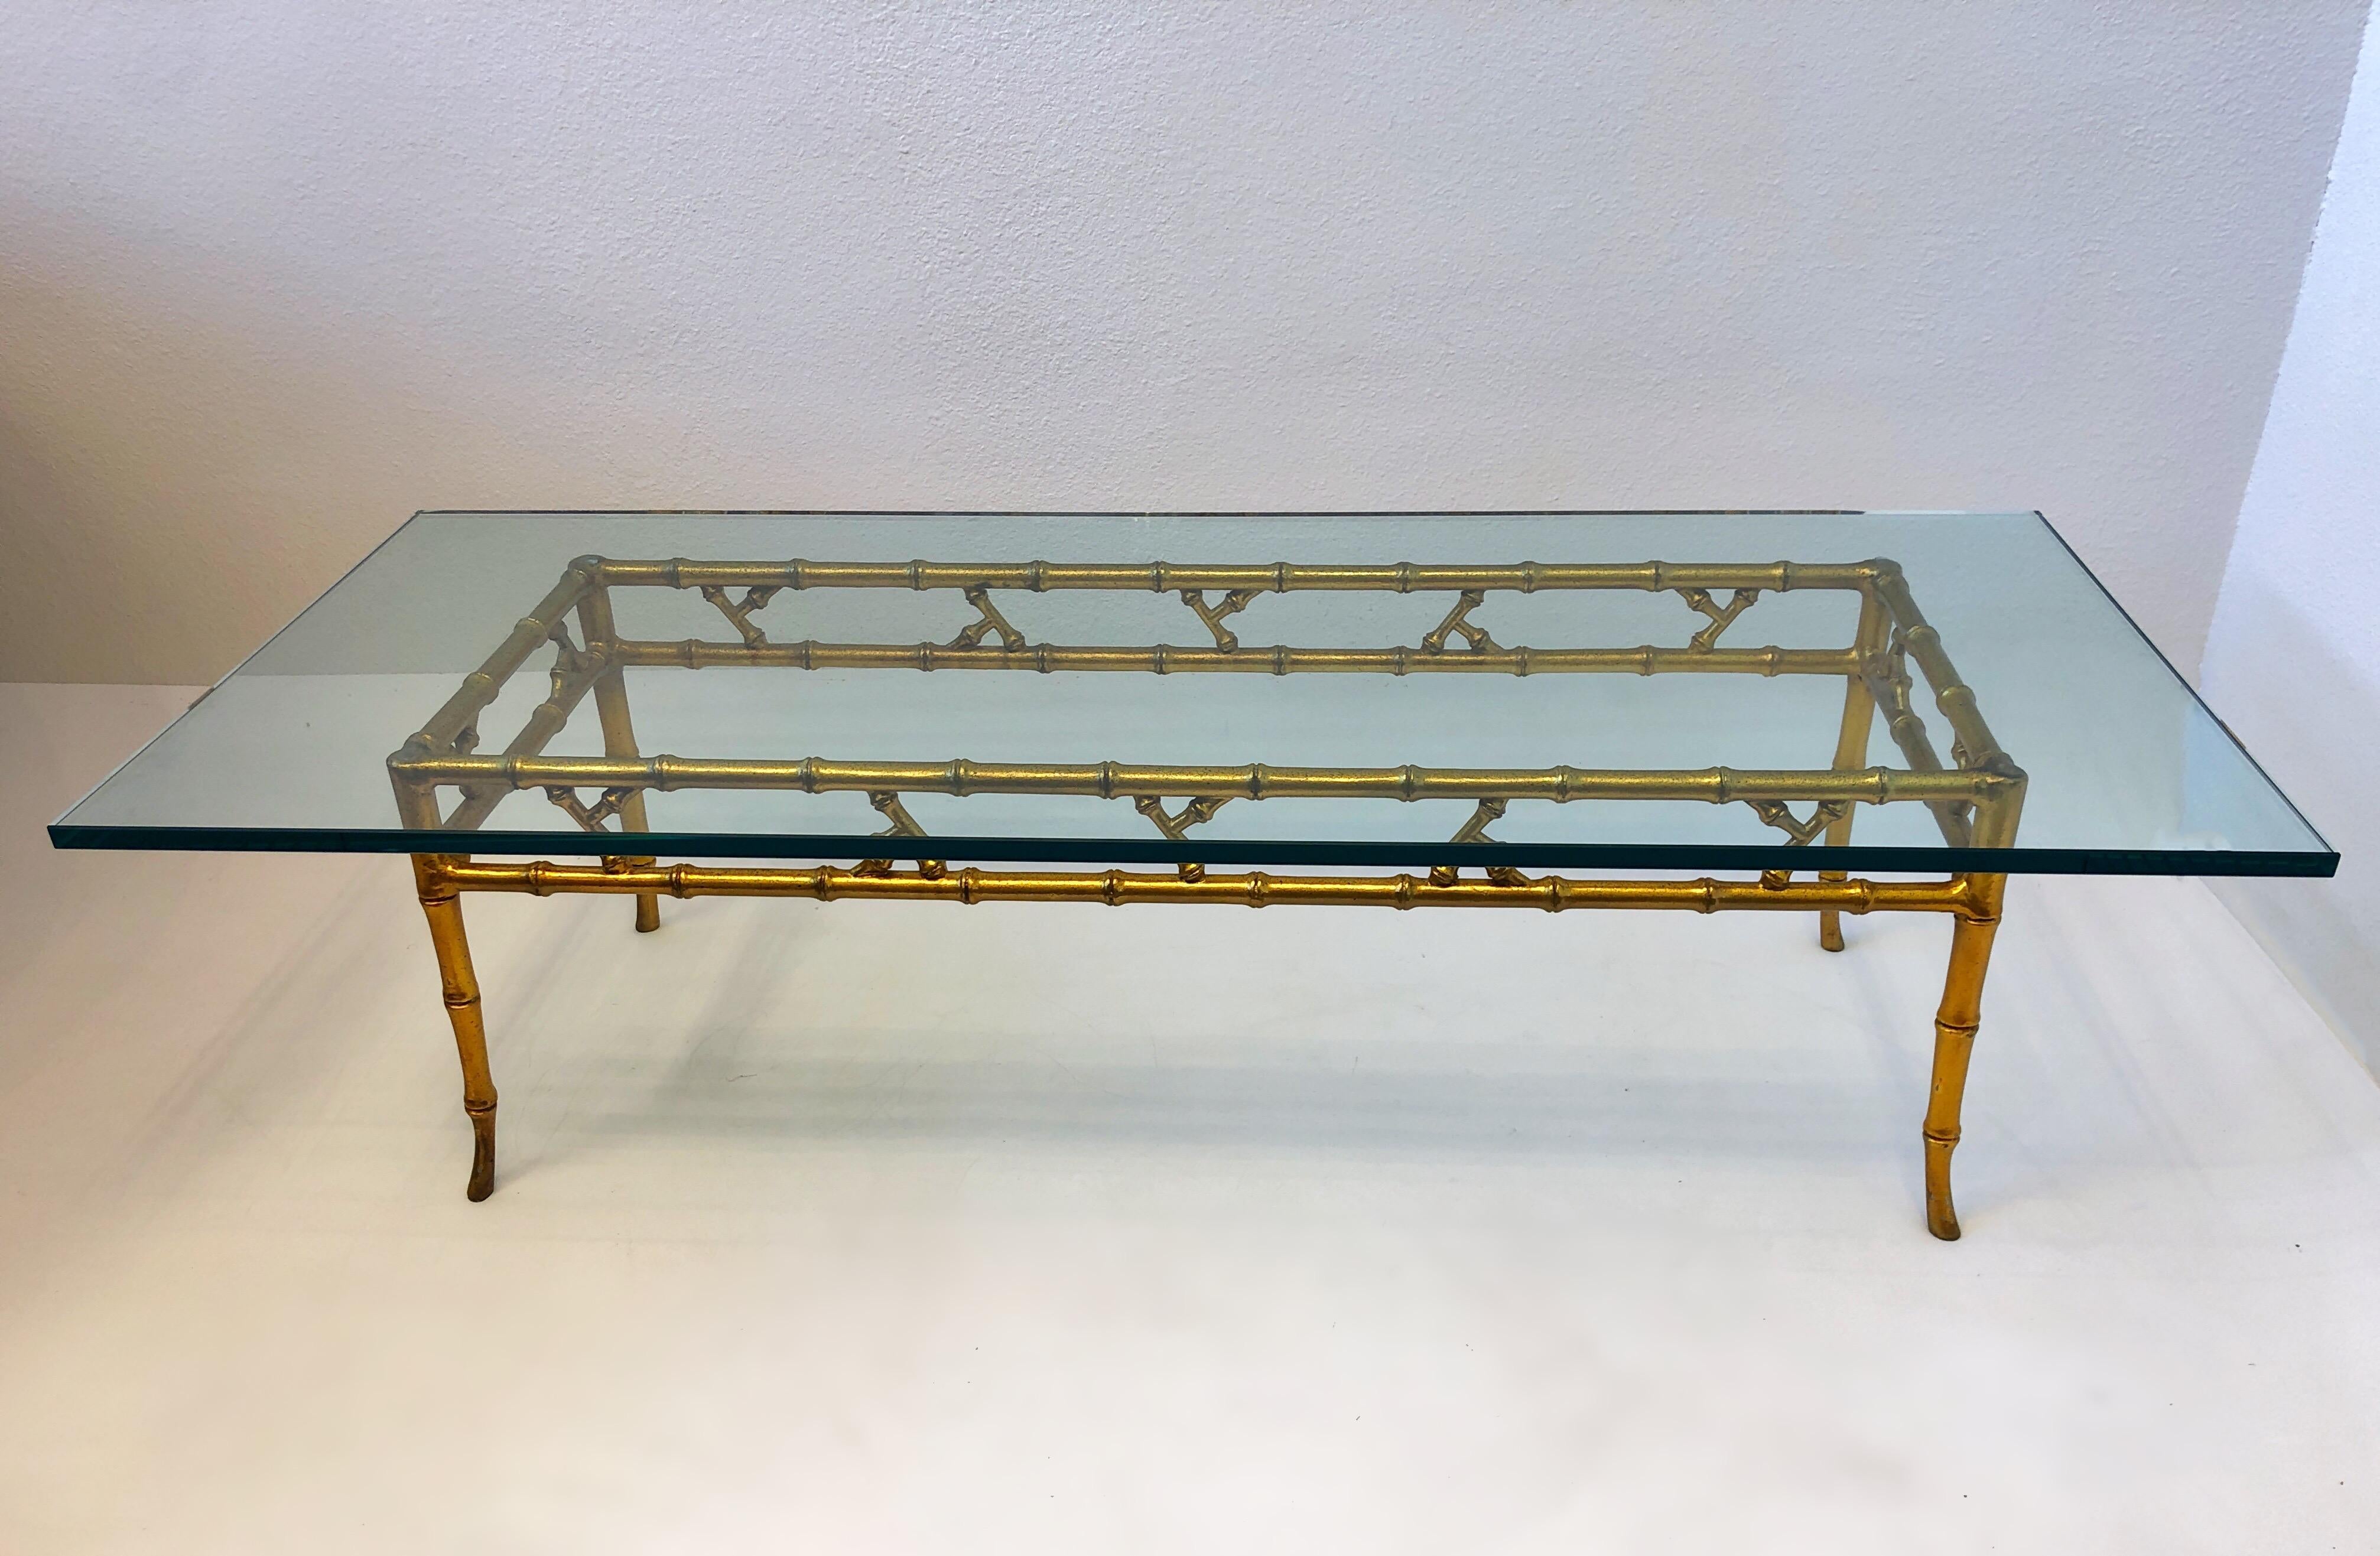 1970’s Gold Faux bamboo coffee table by Brown Jordan.
Constructed powder coated aluminum and 3/4” thick glass top. 
Original condition with minor wear consistent with age. 
Measurements: 58” Wide, 24” Deep, 15.38” High.